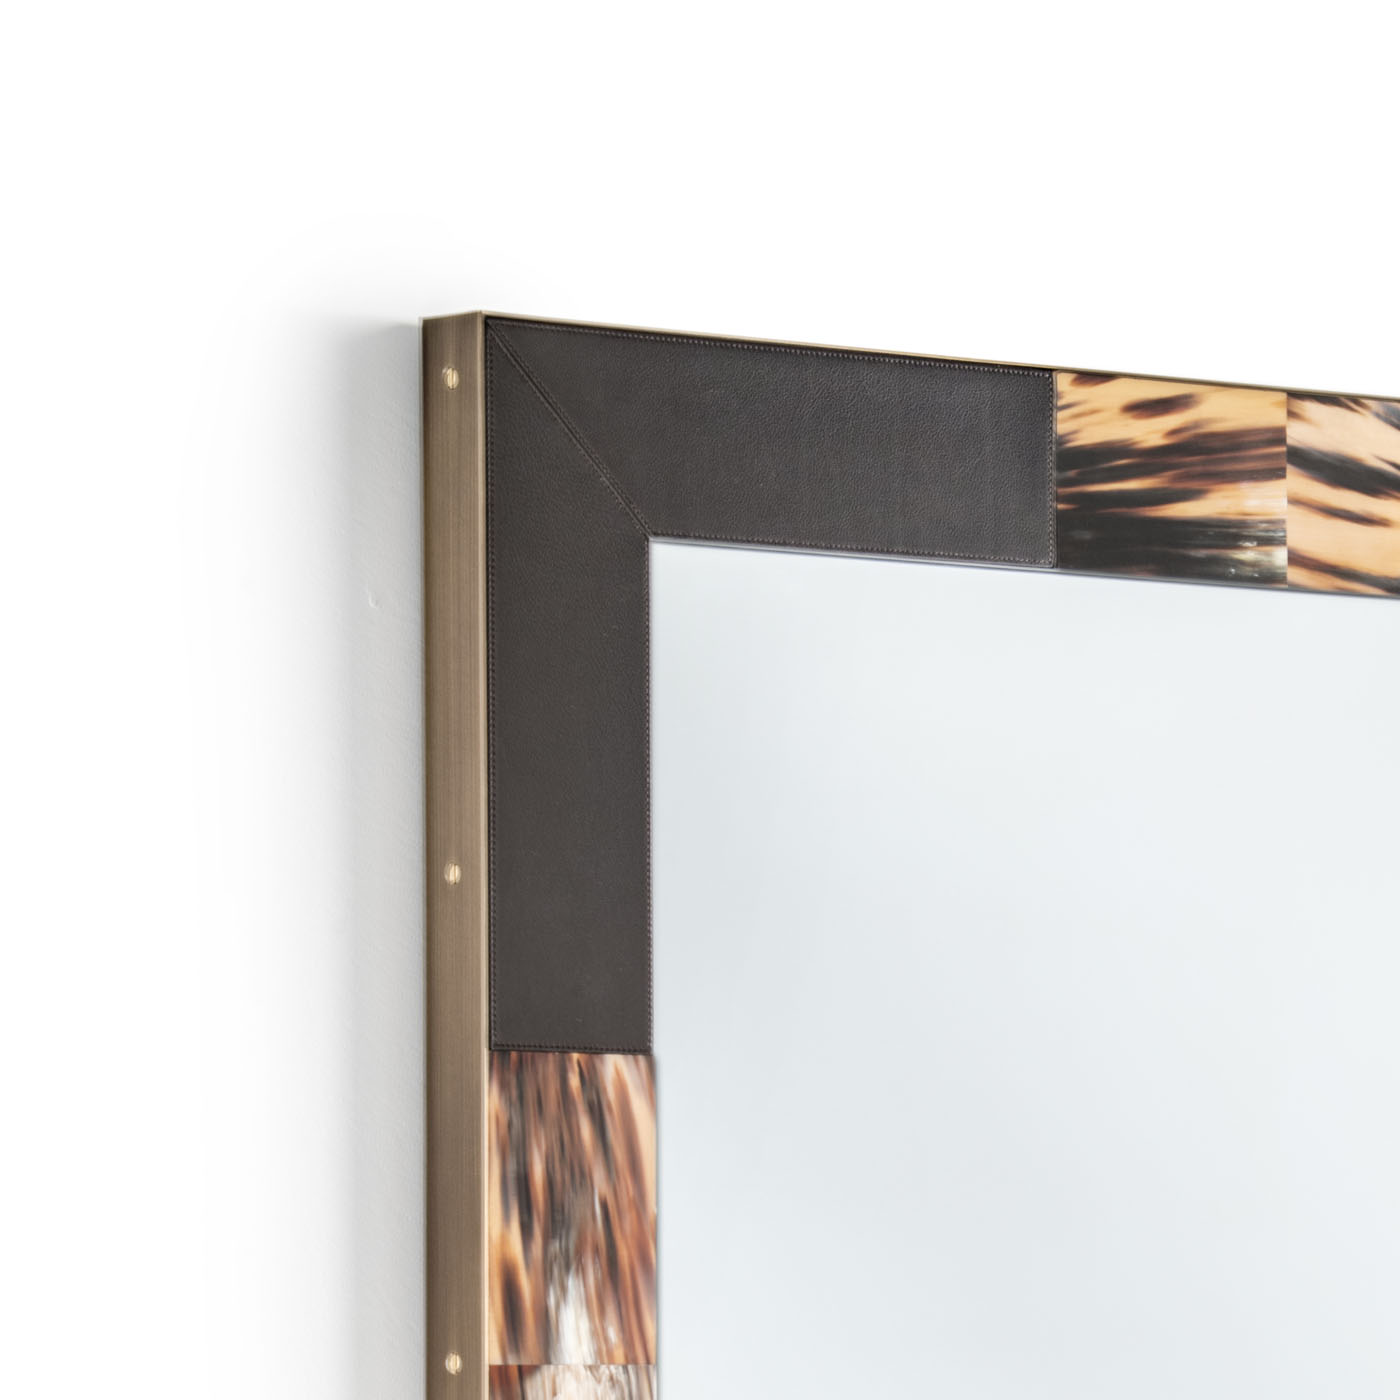 Wall mirrors - Ego wall mirror in leather, horn and burnished brass - detail - Arcahorn